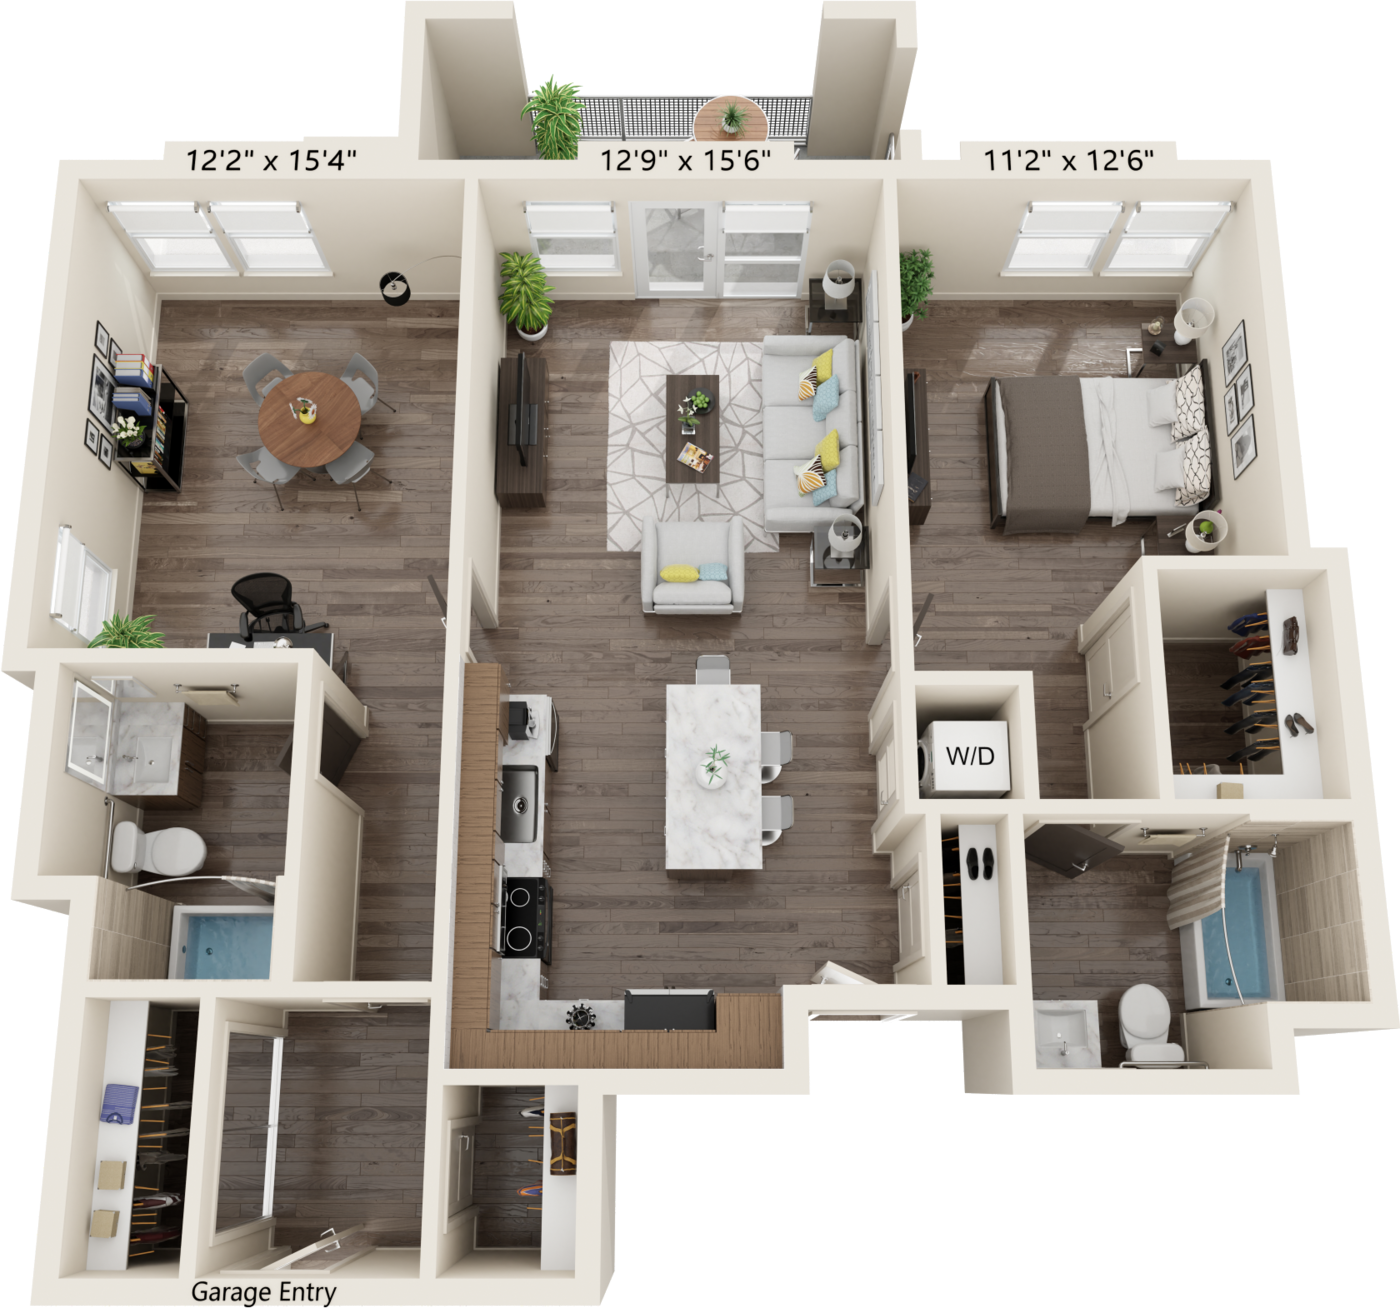 B2D Alt Floor plan with 2 bed, 2 bath and is 1115 square feet